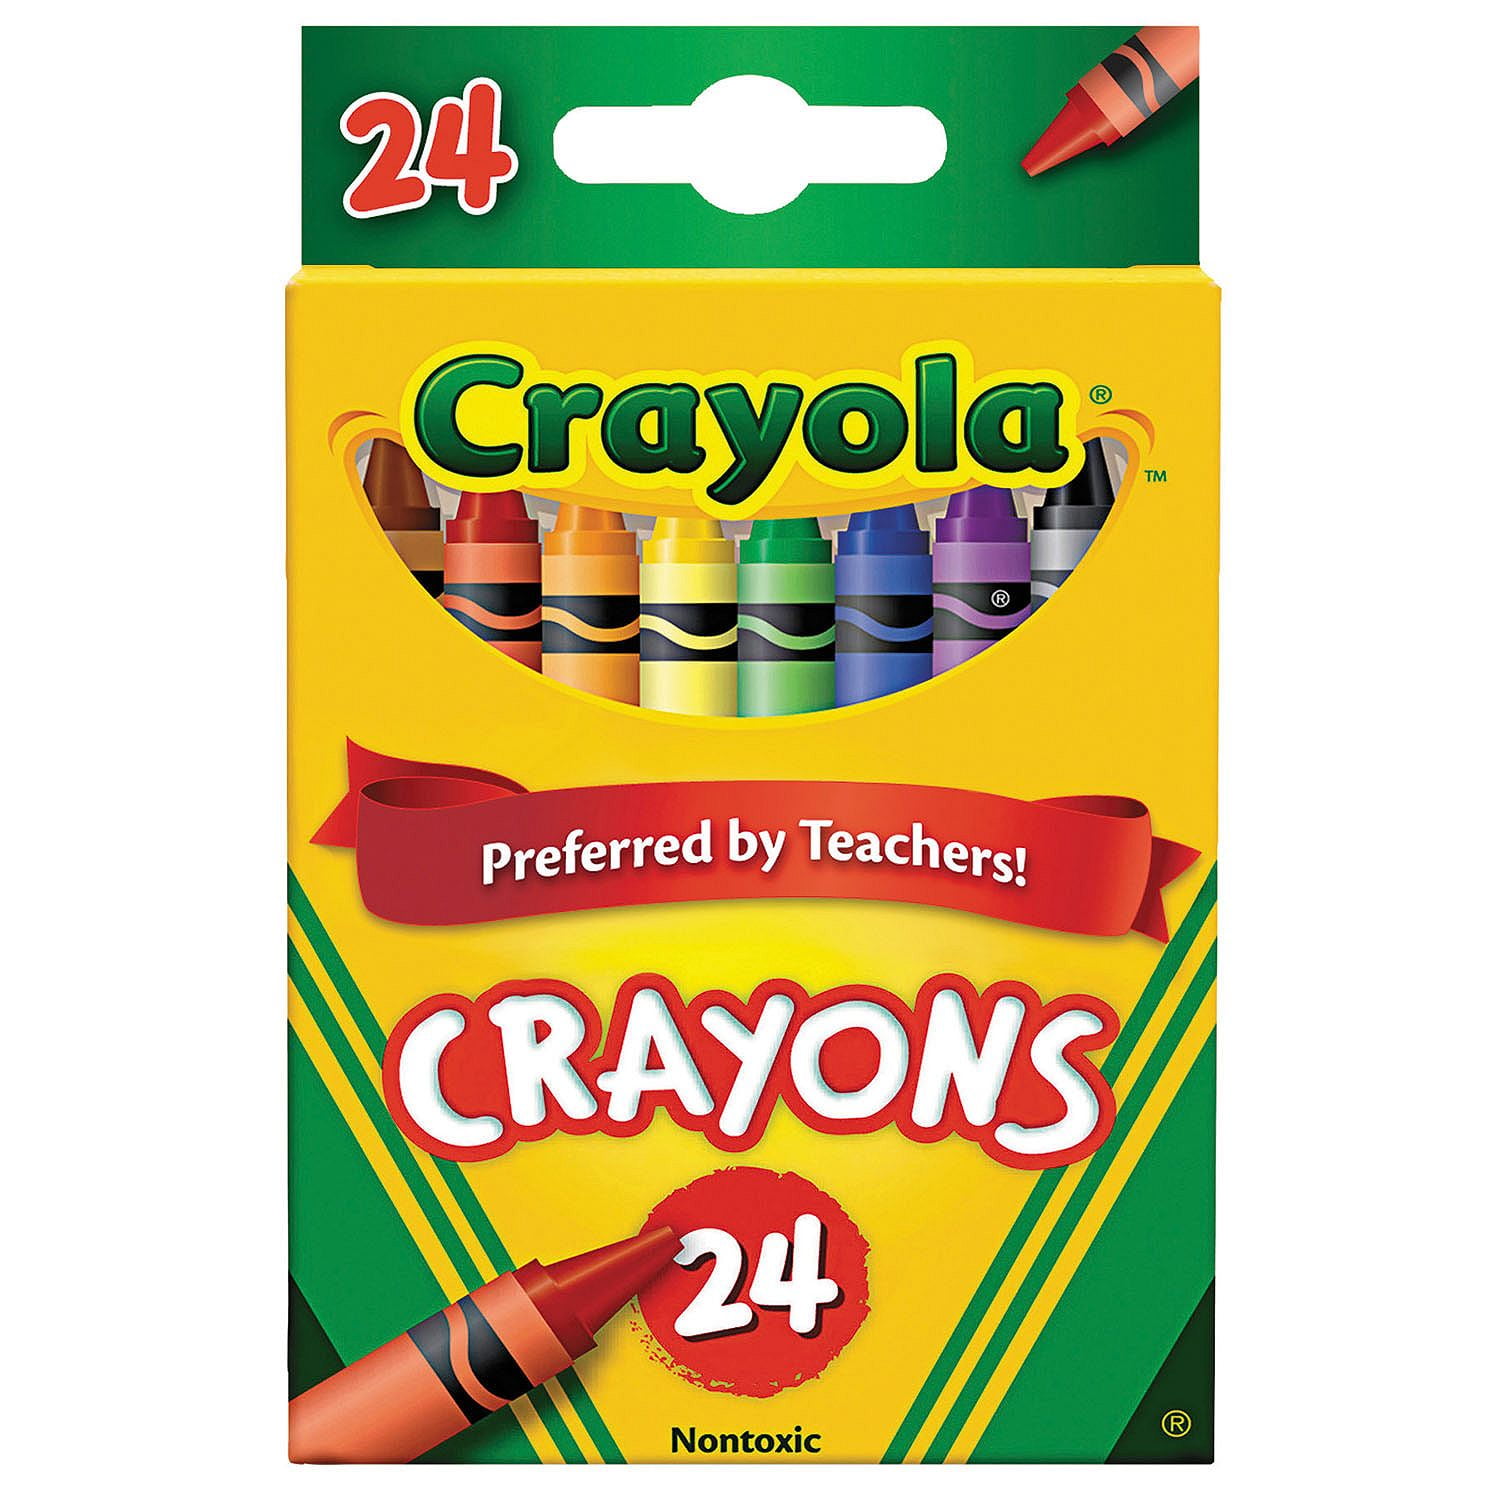 Crayola Classic Color Crayons, 24 Count, (Pack Of 6), Crayons